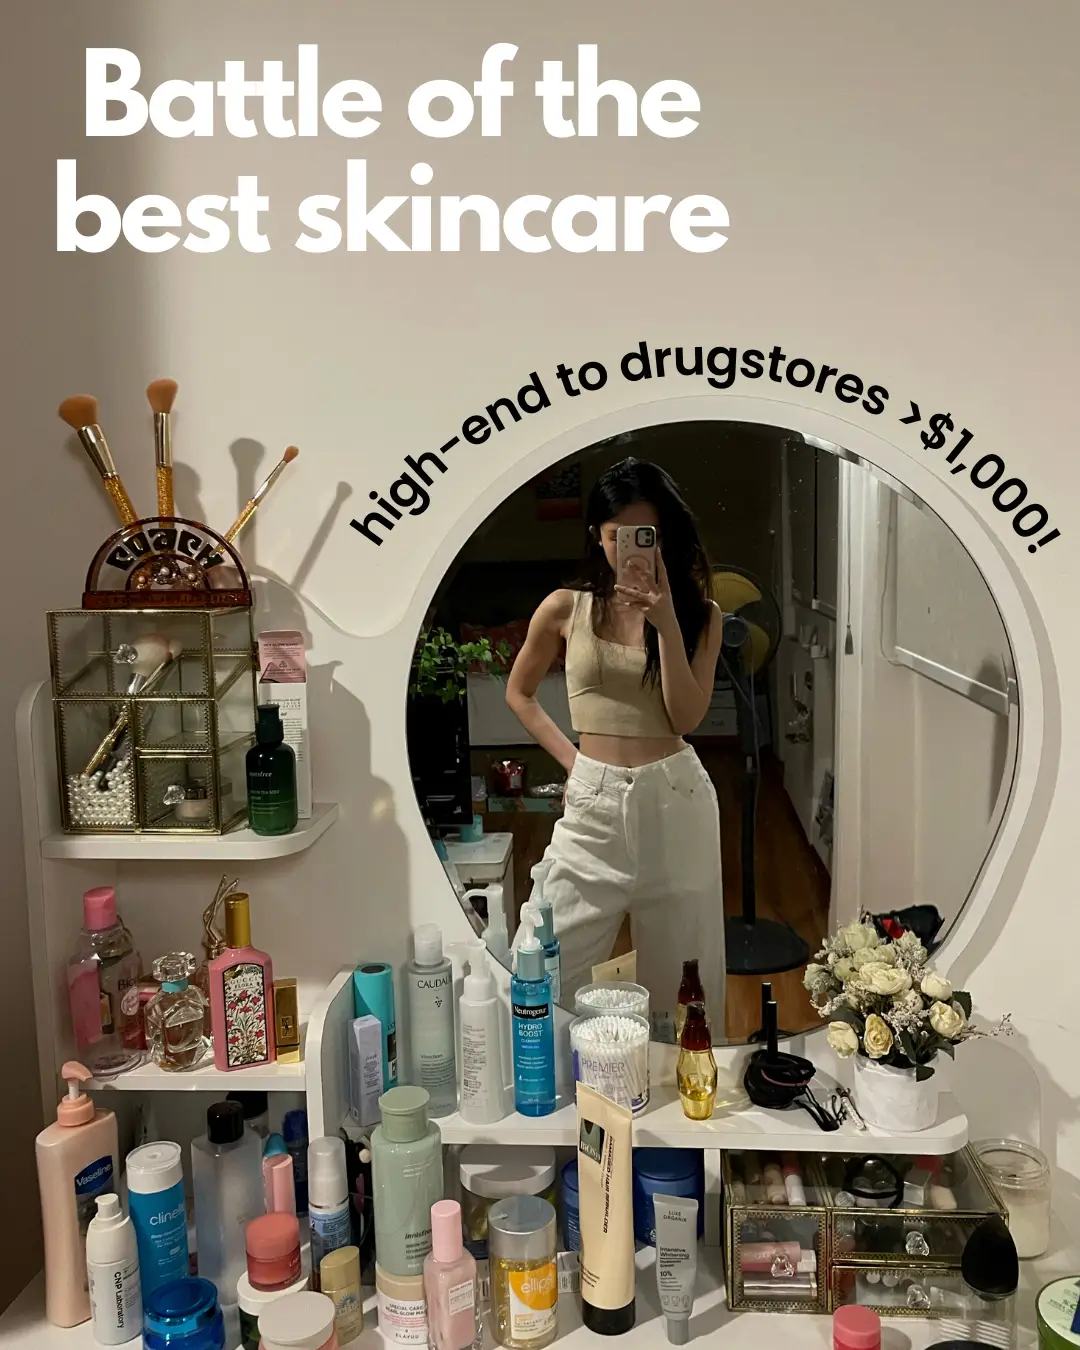 Review >$1K worth of skincare with me 😳's images(0)